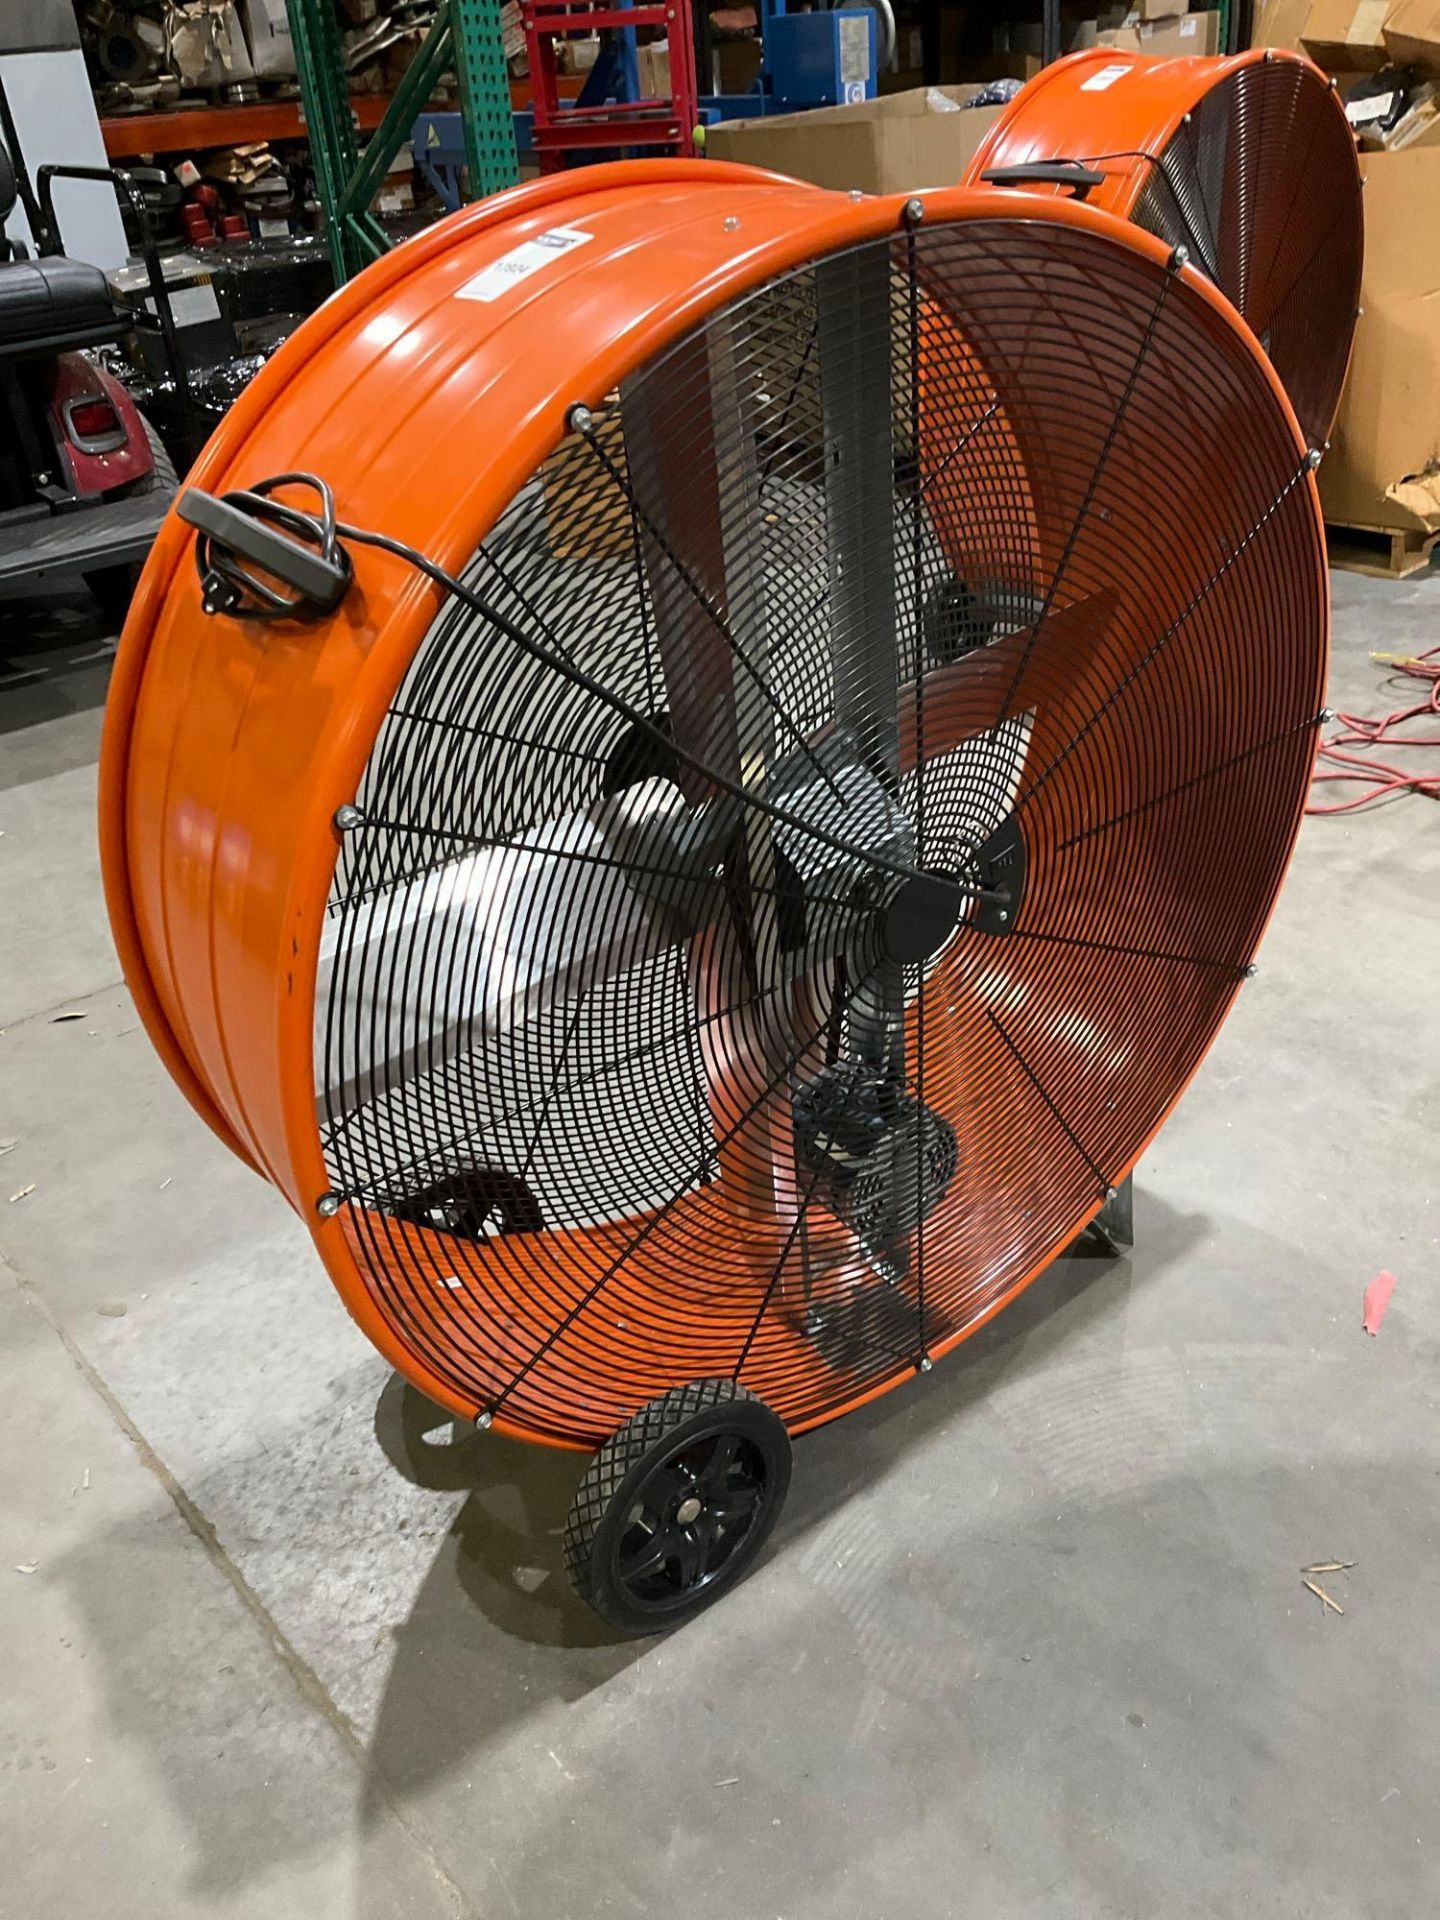 UNUSED 42" COMMERCIAL ELECTRIC PORTABLE BARREL FAN - Image 4 of 7